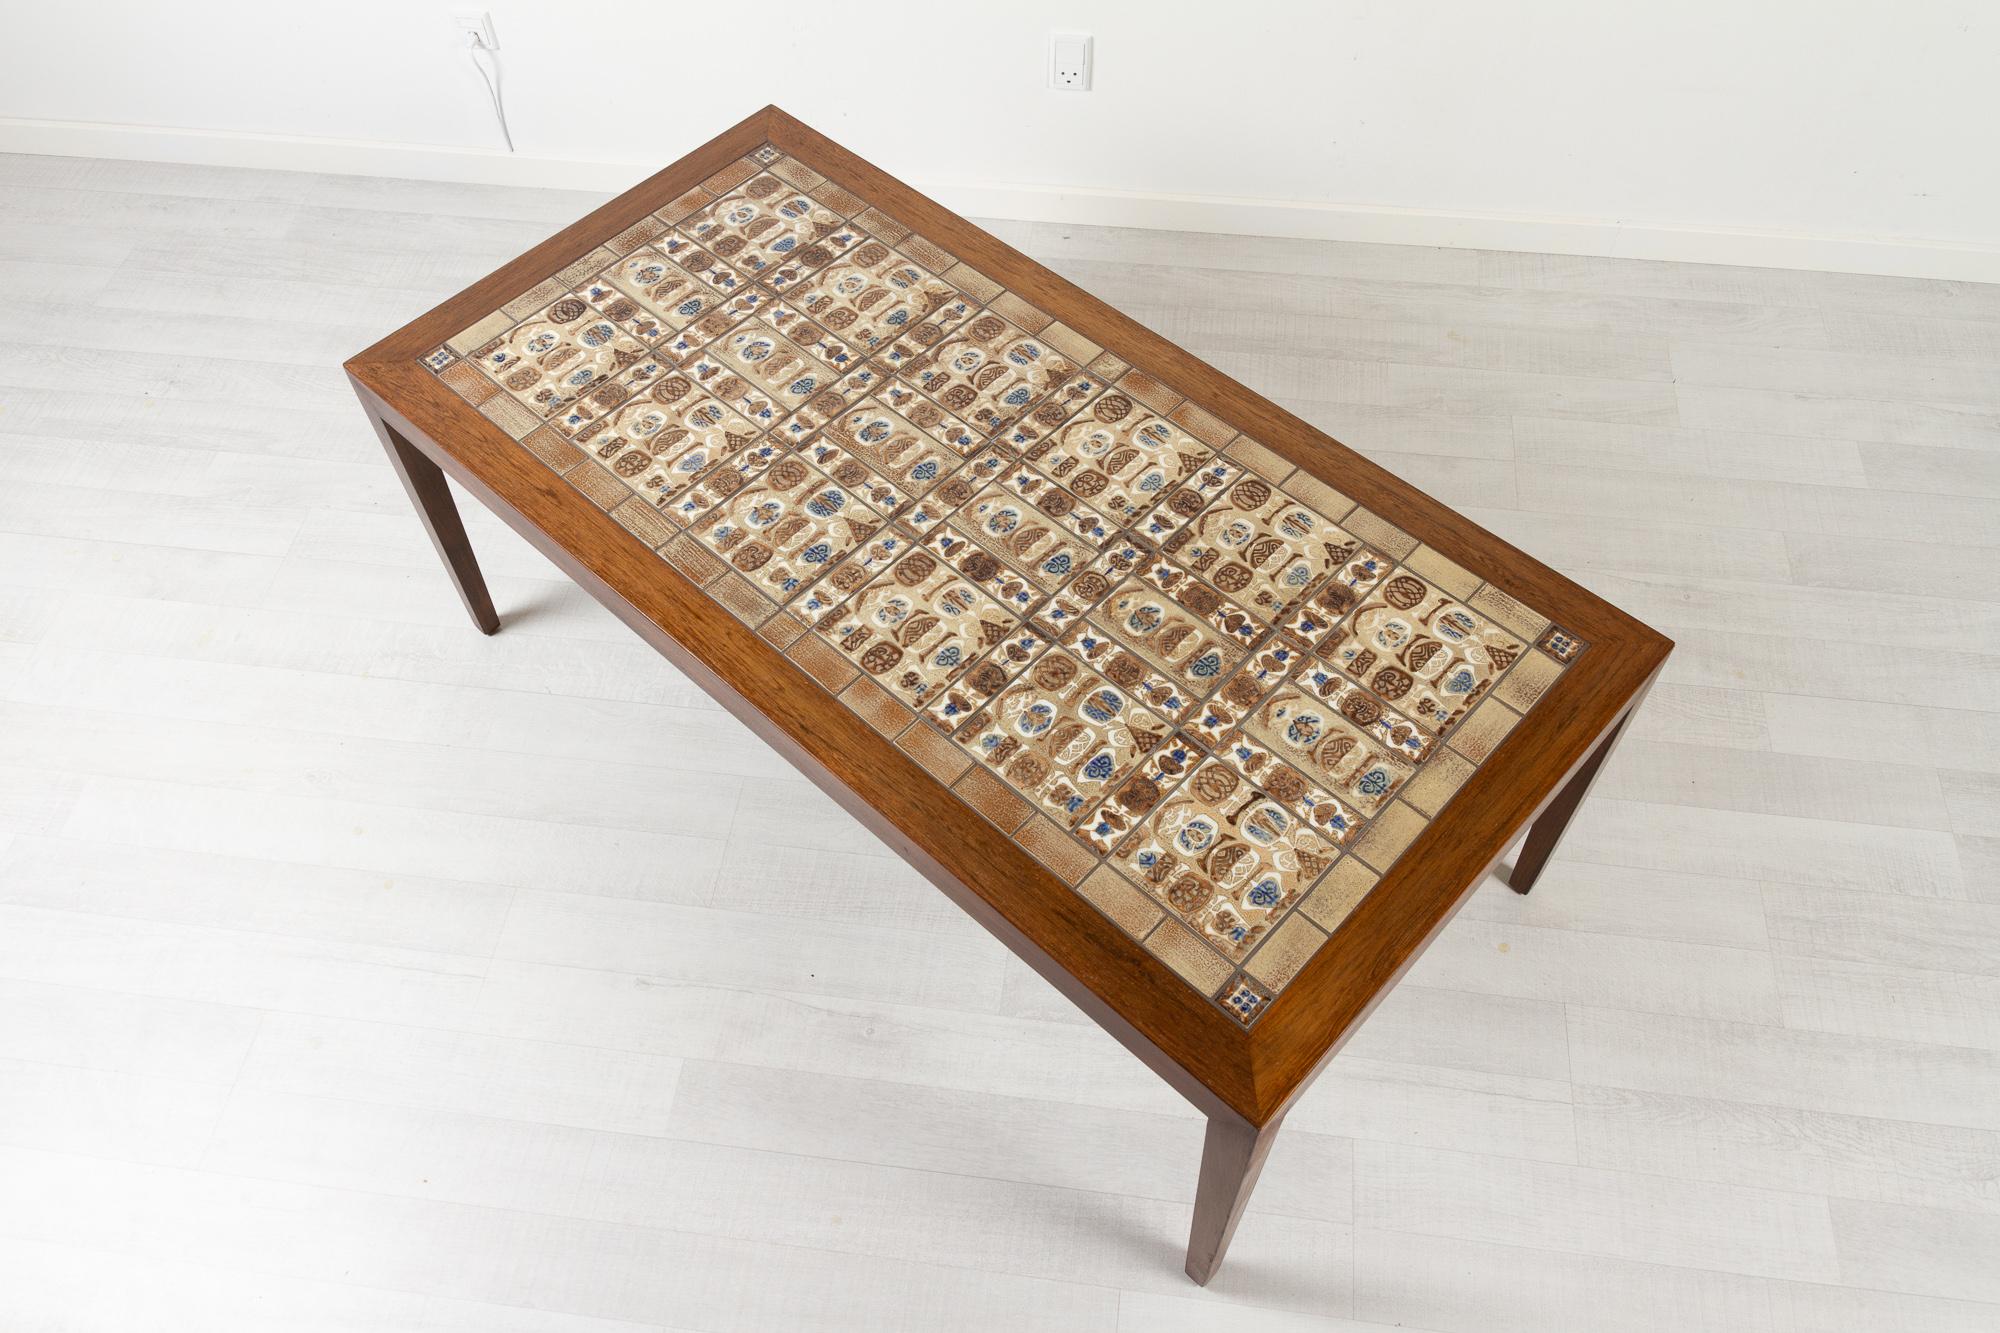 Vintage Danish rosewood coffee table by Severin Hansen for Haslev Møbelsnedkeri 1960s.
Danish Mid-Century Modern rectangular coffee table with inlaid Baca tiles from Royal Copenhagen. The tiles were designed by Danish artist Nils Thorsson who is